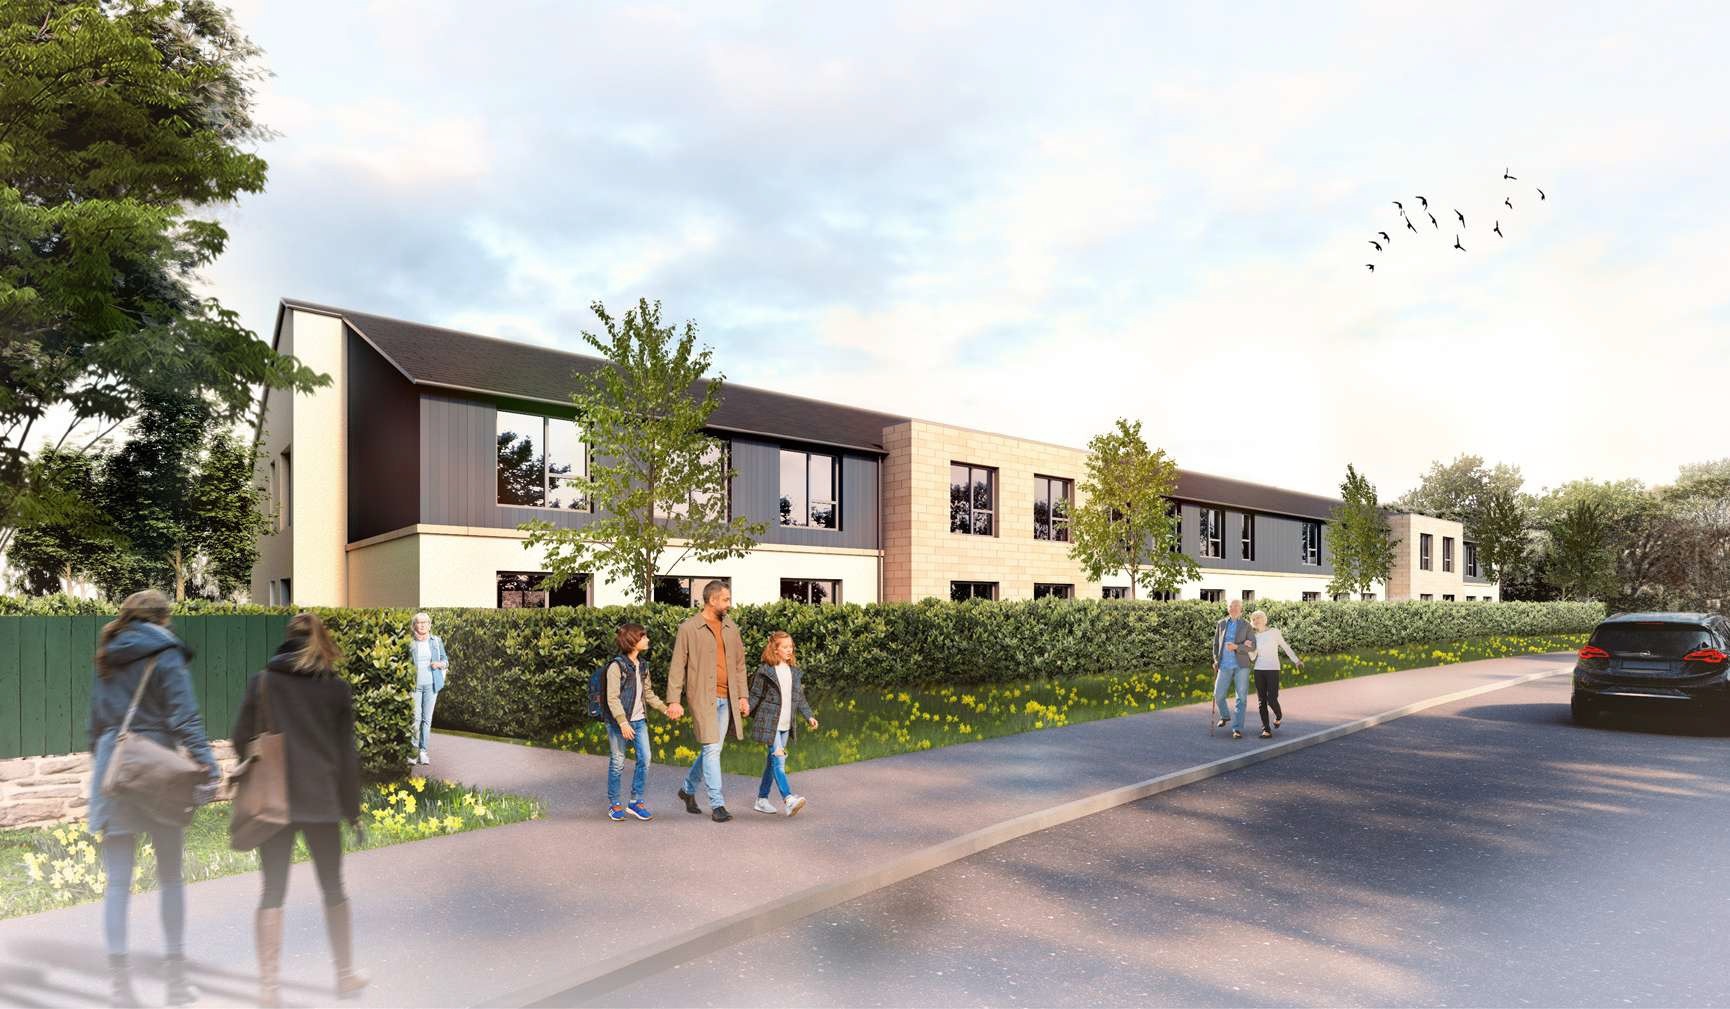 Approval given for 50-bed care home in Stirling